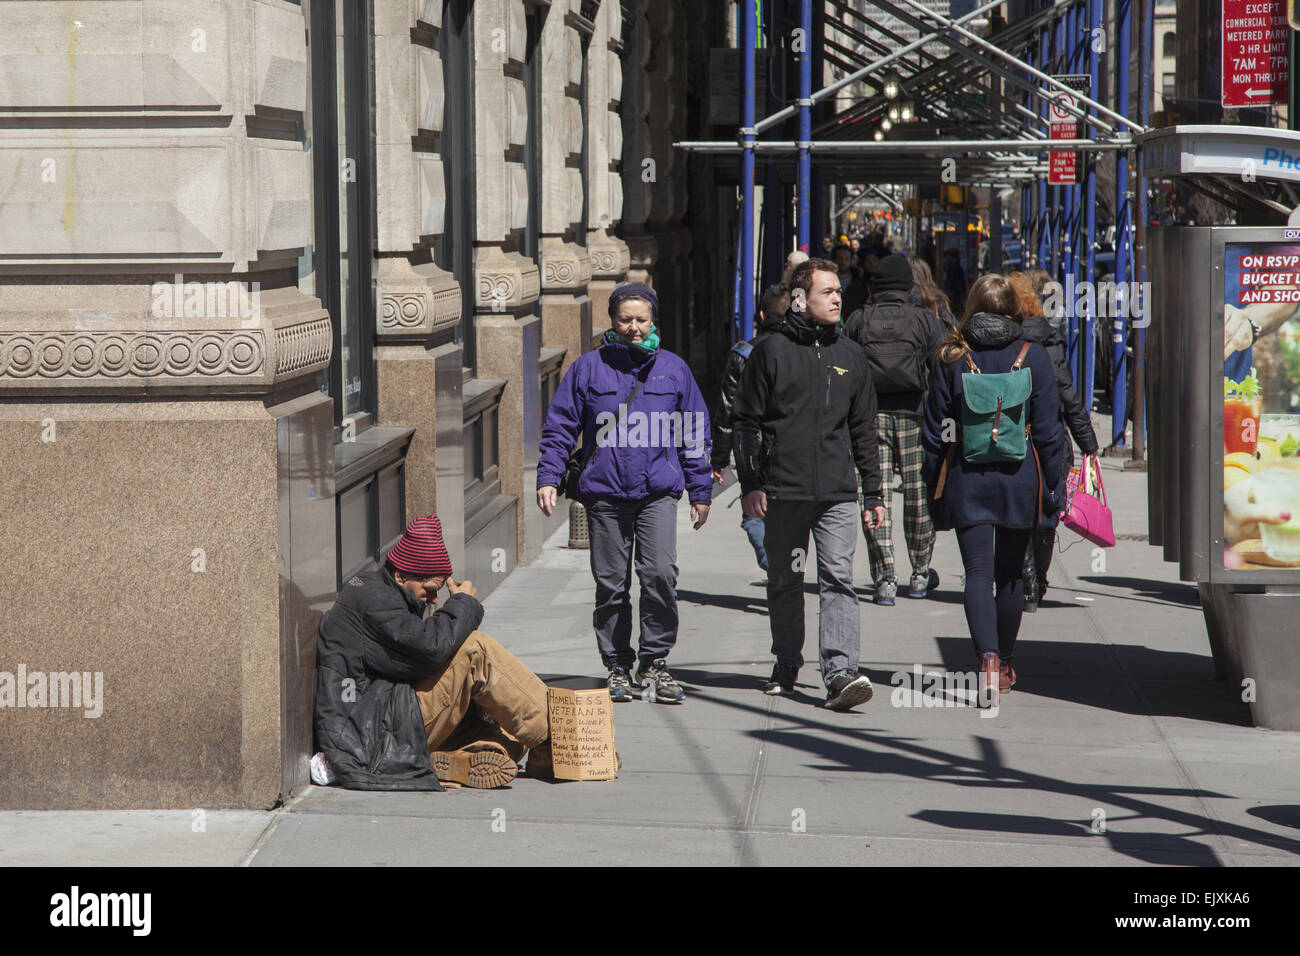 Man with sign saying he's a homeless veteran, a plummer by trade and needs a helping hand. 5th Ave. NYC. Stock Photo